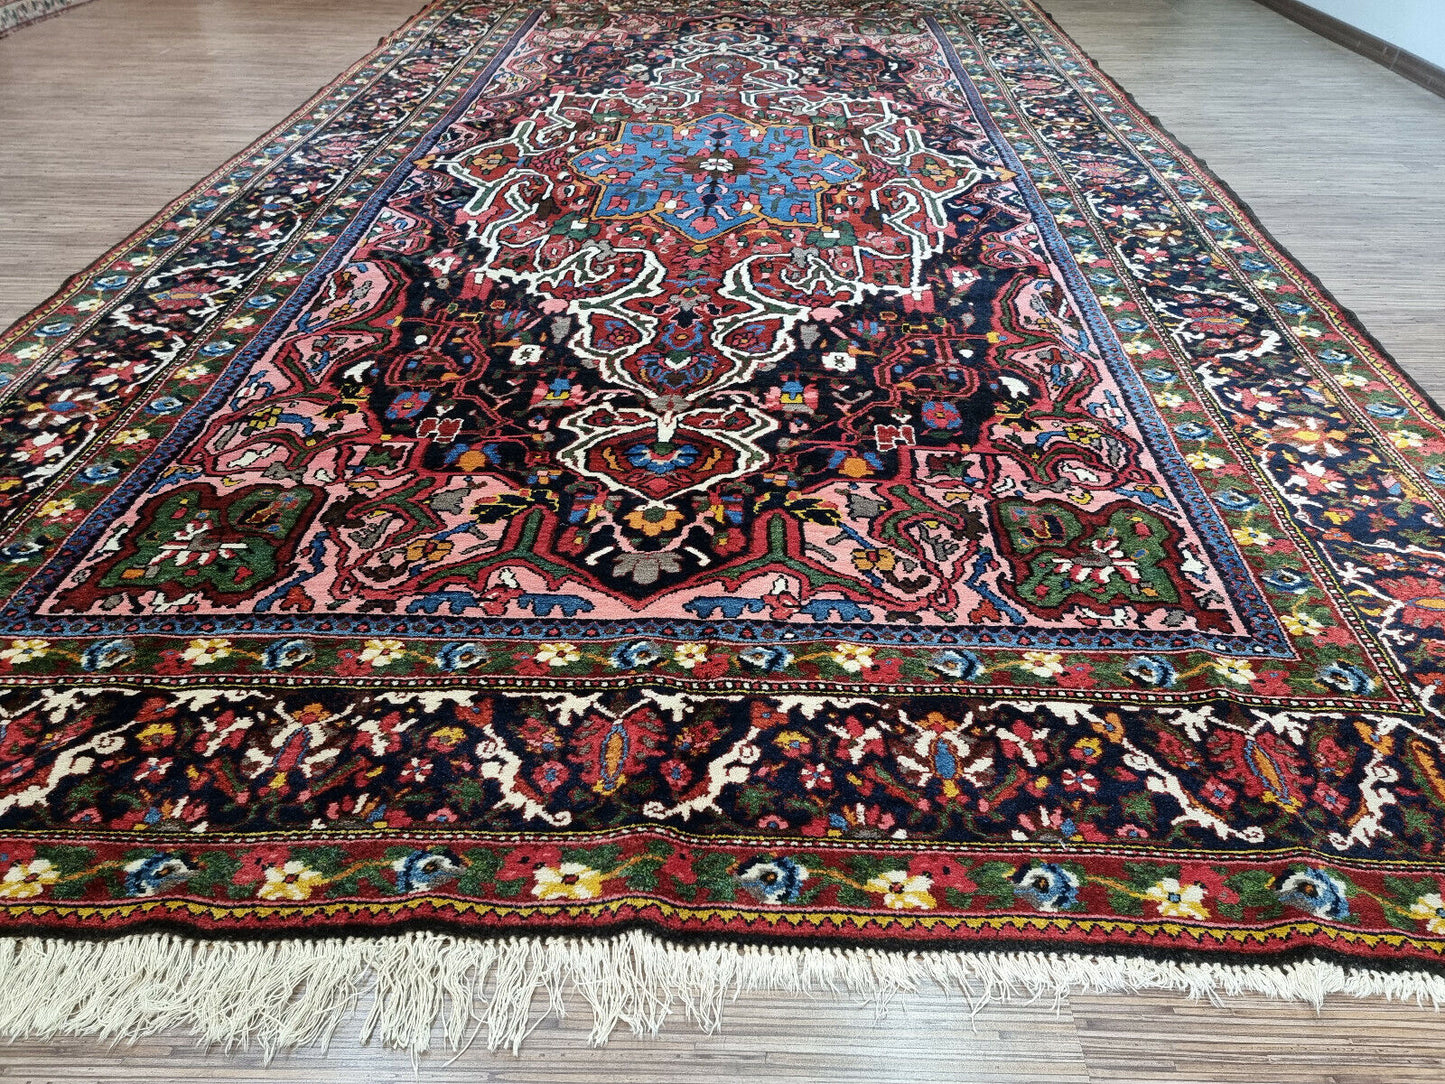 Close-up of room placement on Handmade Antique Persian Bakhtiari Rug - Detailed view showing the rug's suitability for various room settings, enhancing the décor of any space.